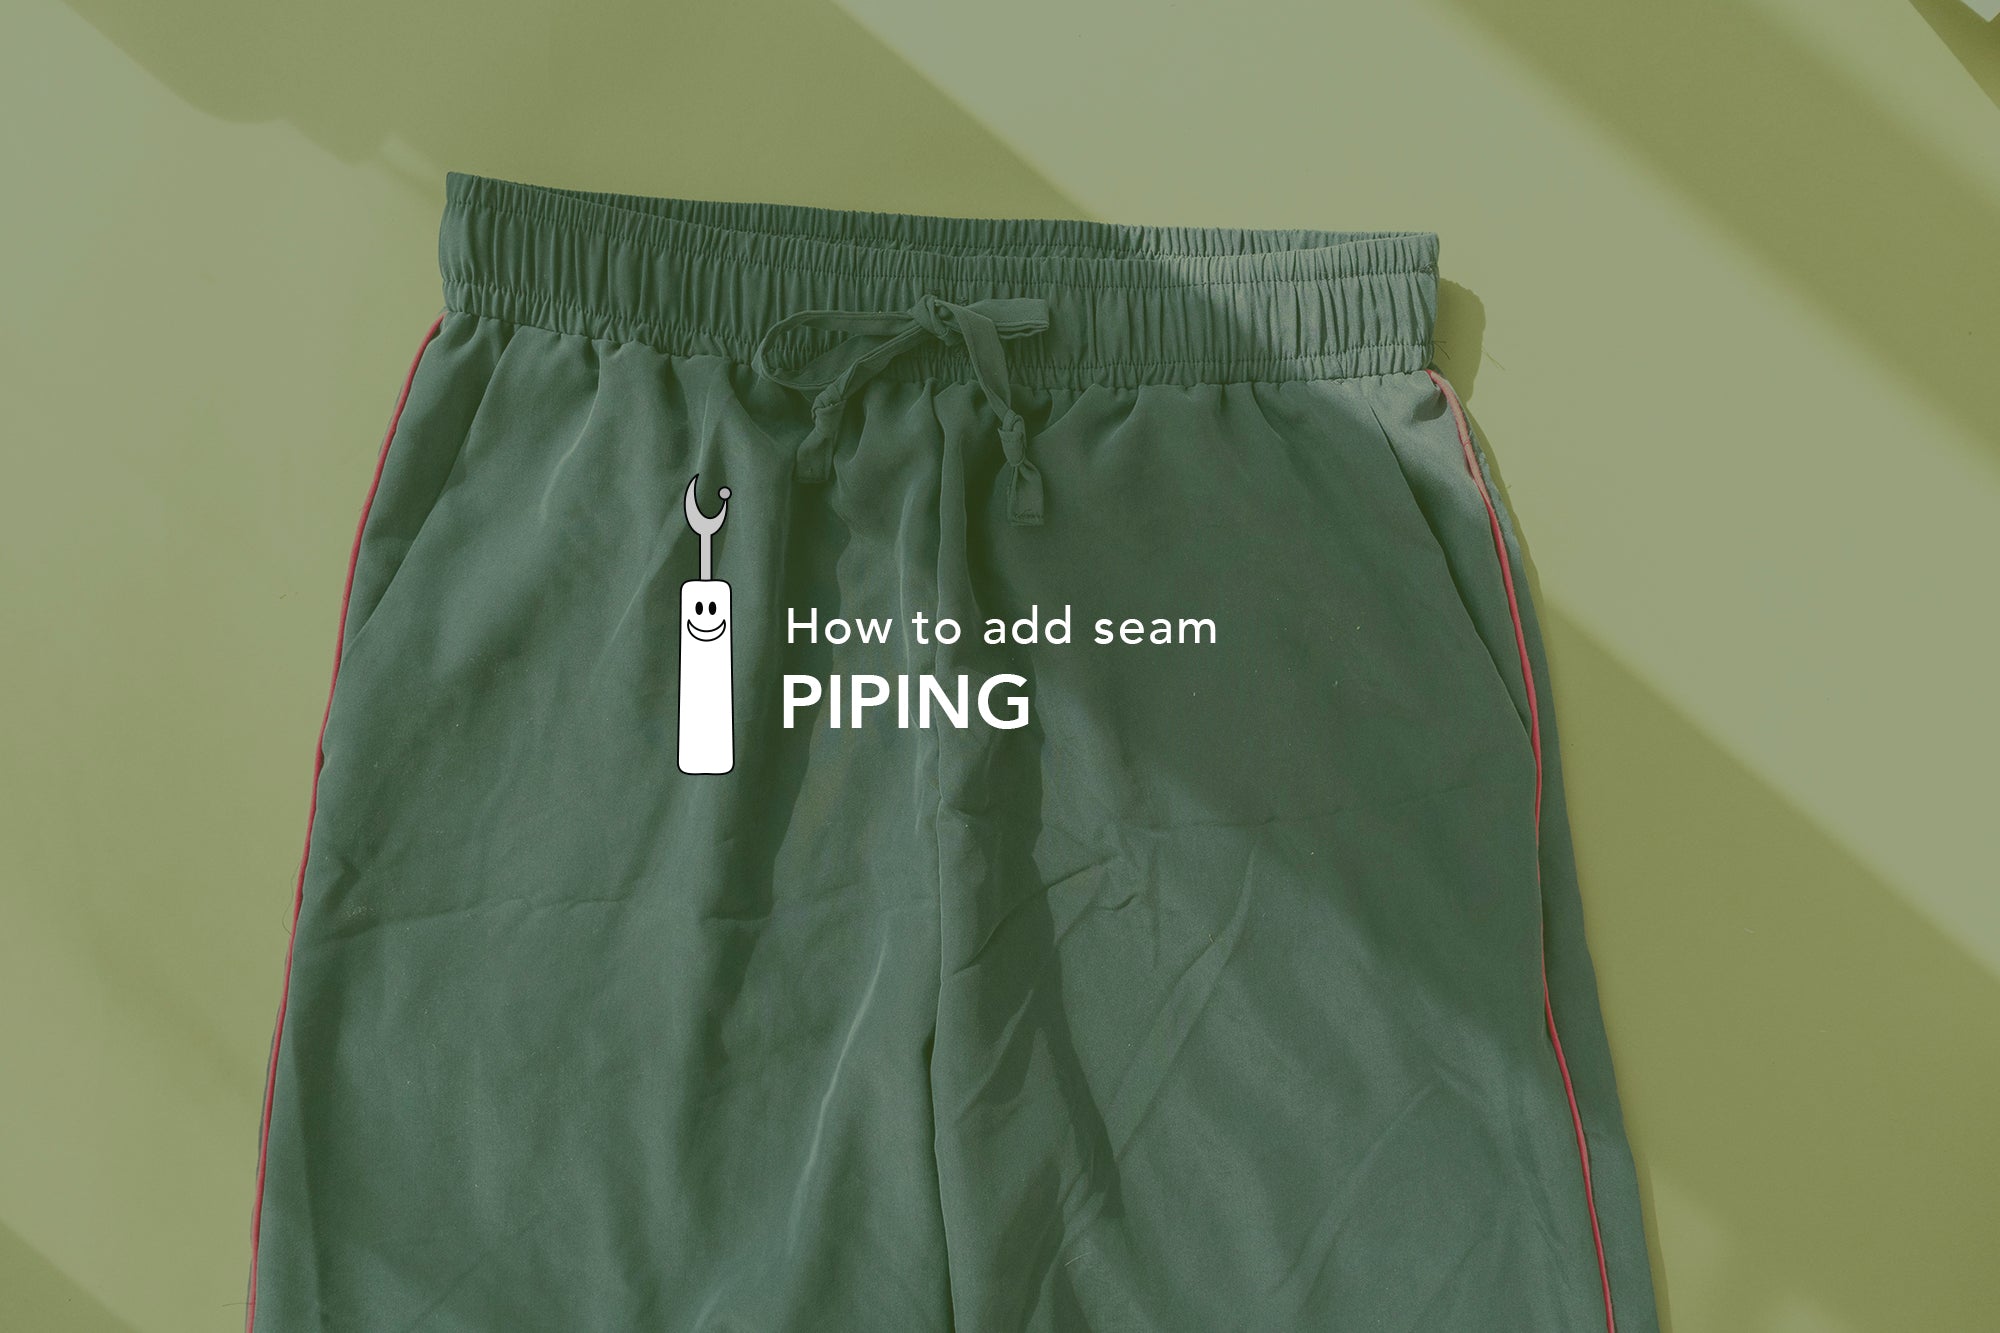 How to add piping into your seams